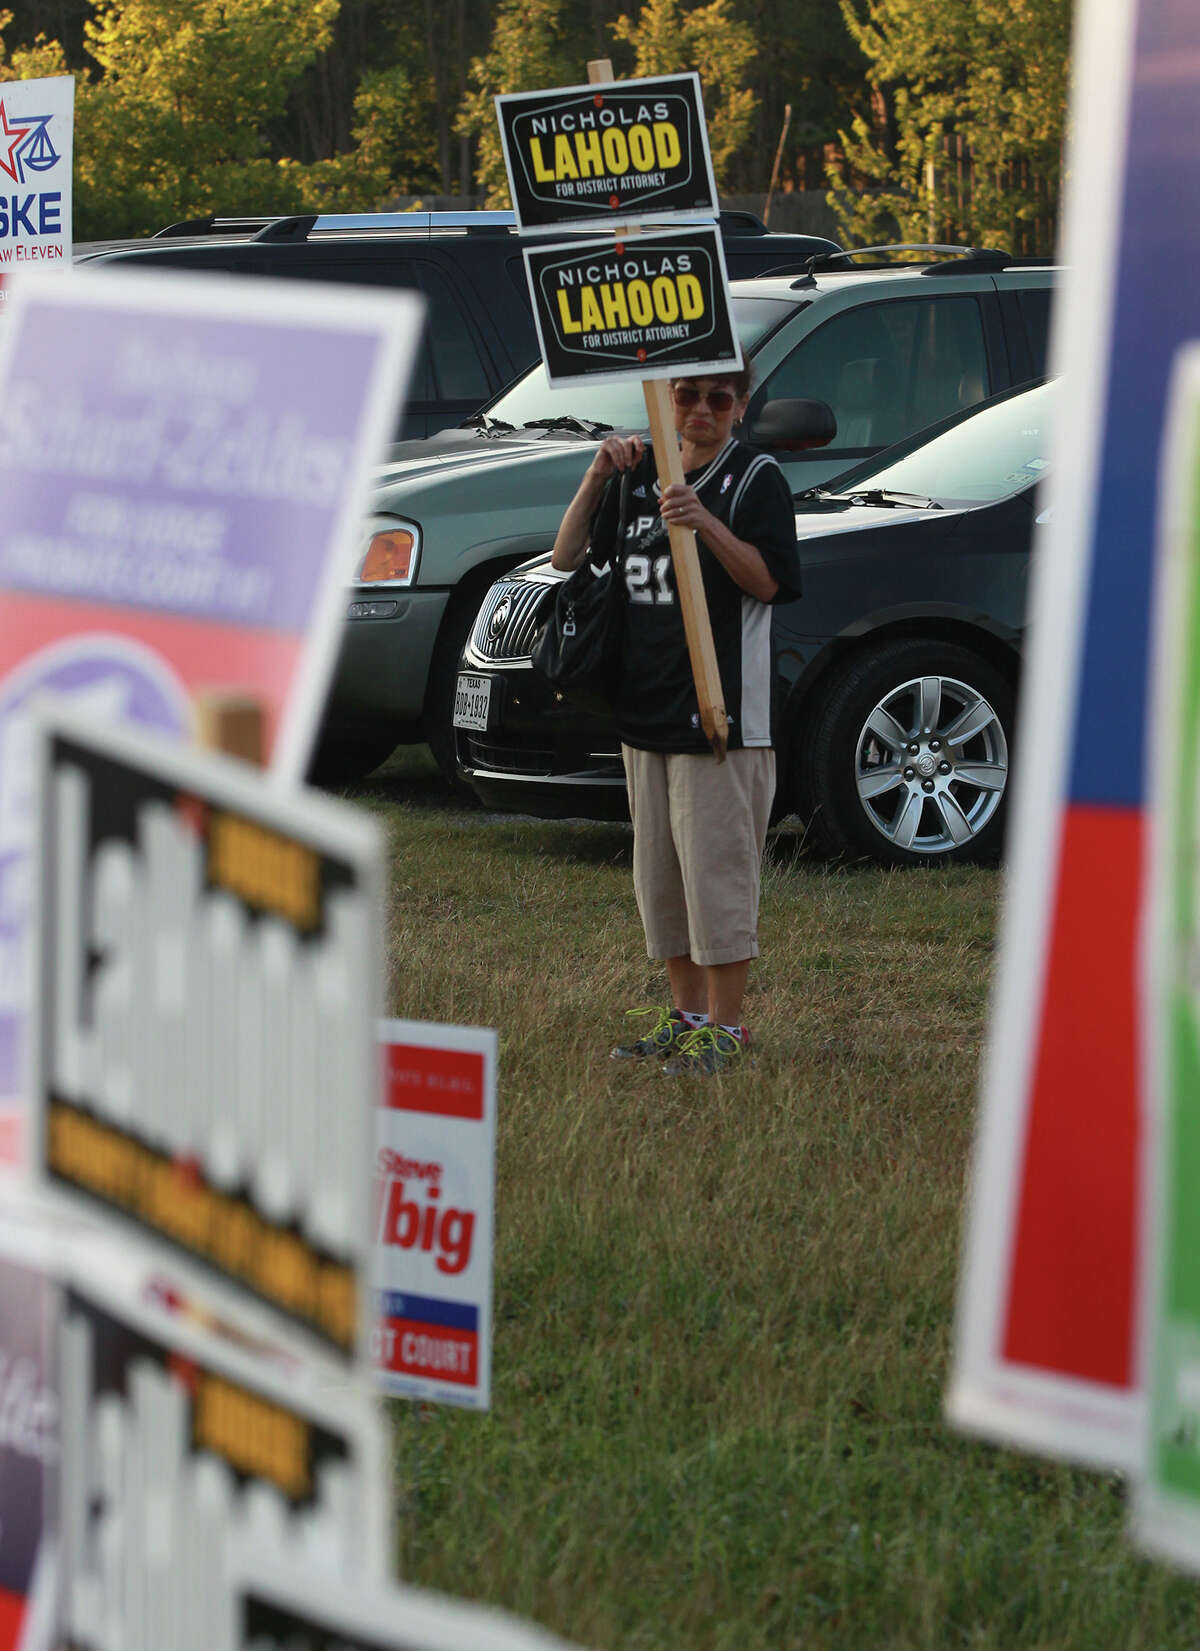 Norma LaHood, mother of District Attorney candidate Nicholas LaHood, stands Monday October 20, 2014 on the first day of early voting. LaHood was at the Brook Hollow Branch of the San Antonio Public Library.